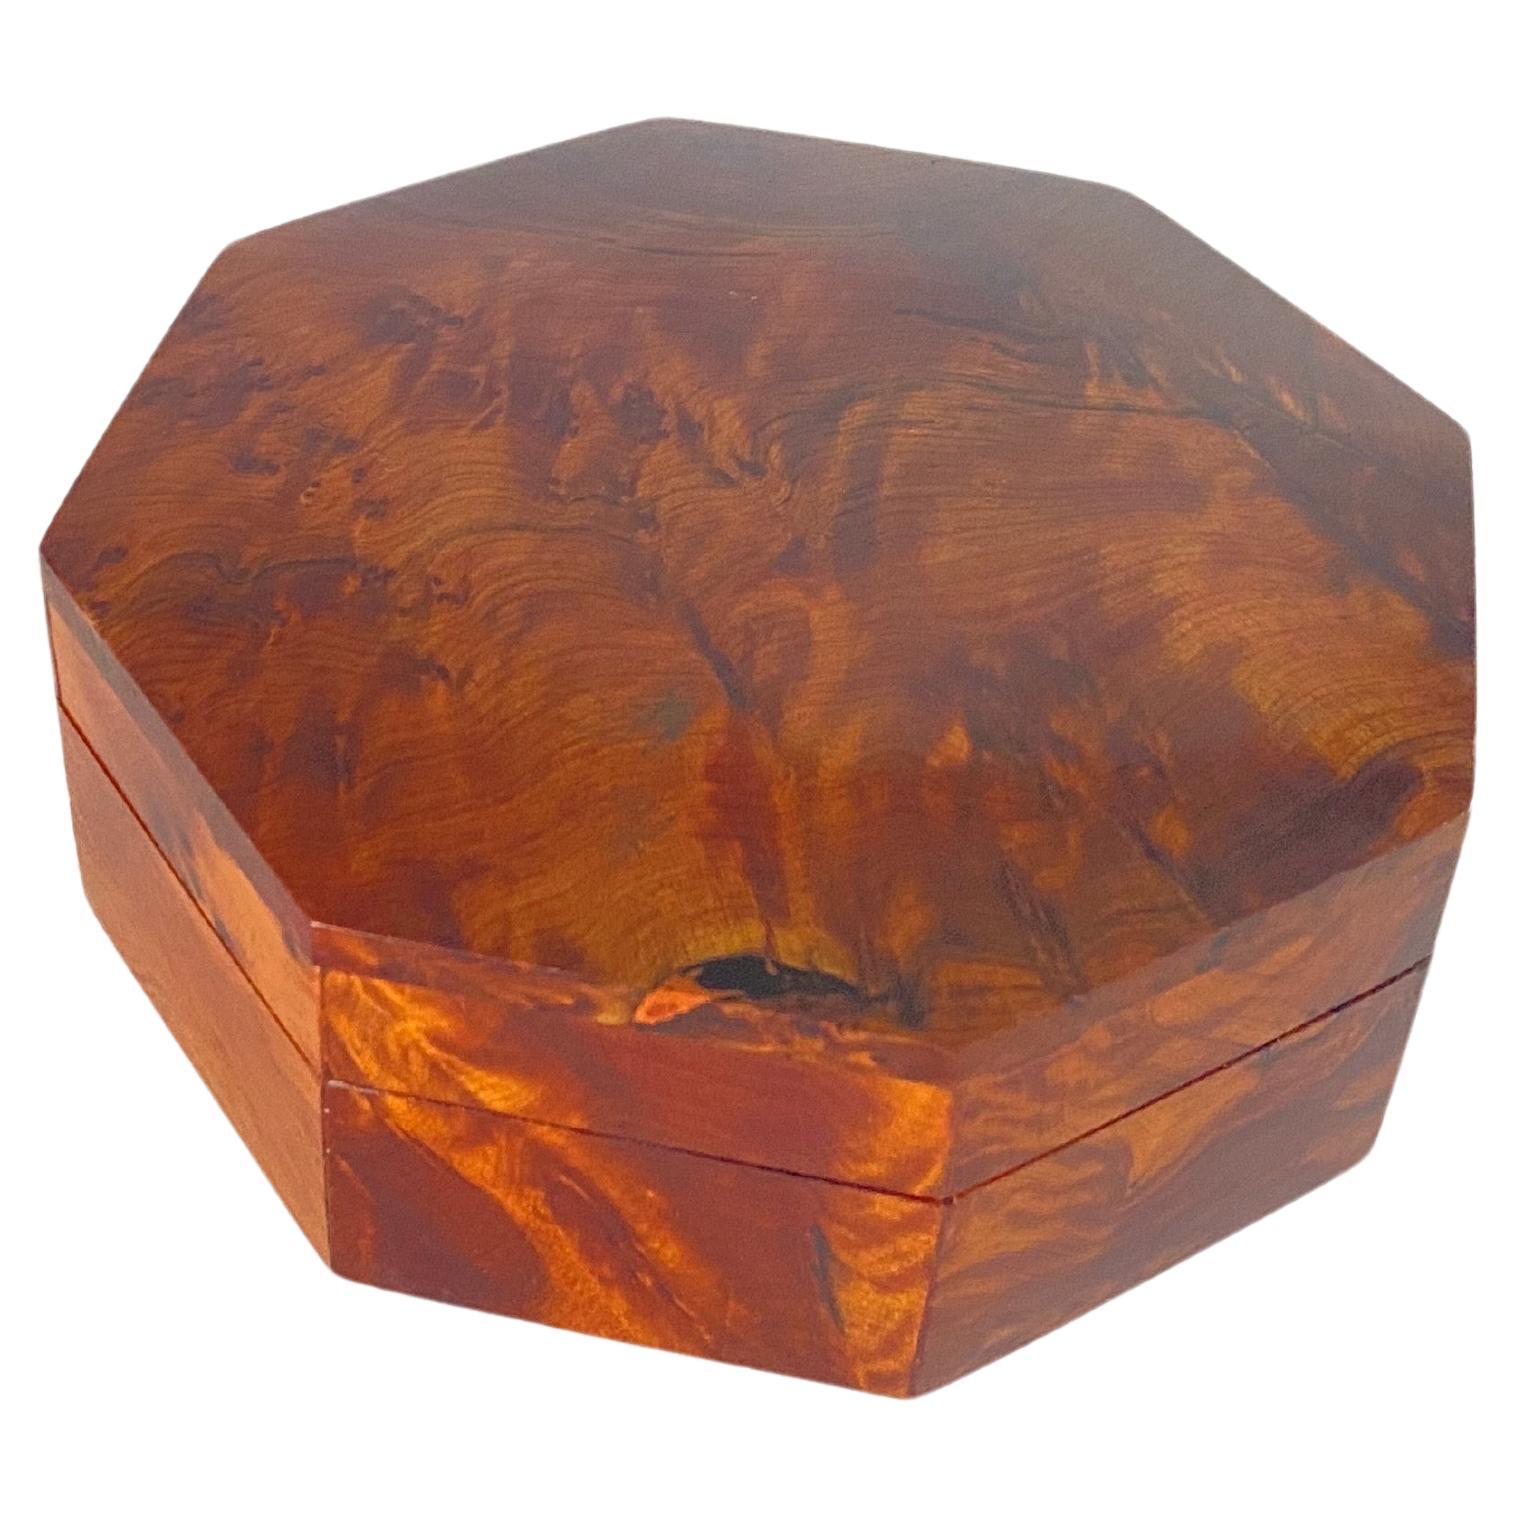 This box is in burl wood. It has been made in France in the 1970s. The color is brown, and it is in an good condition.